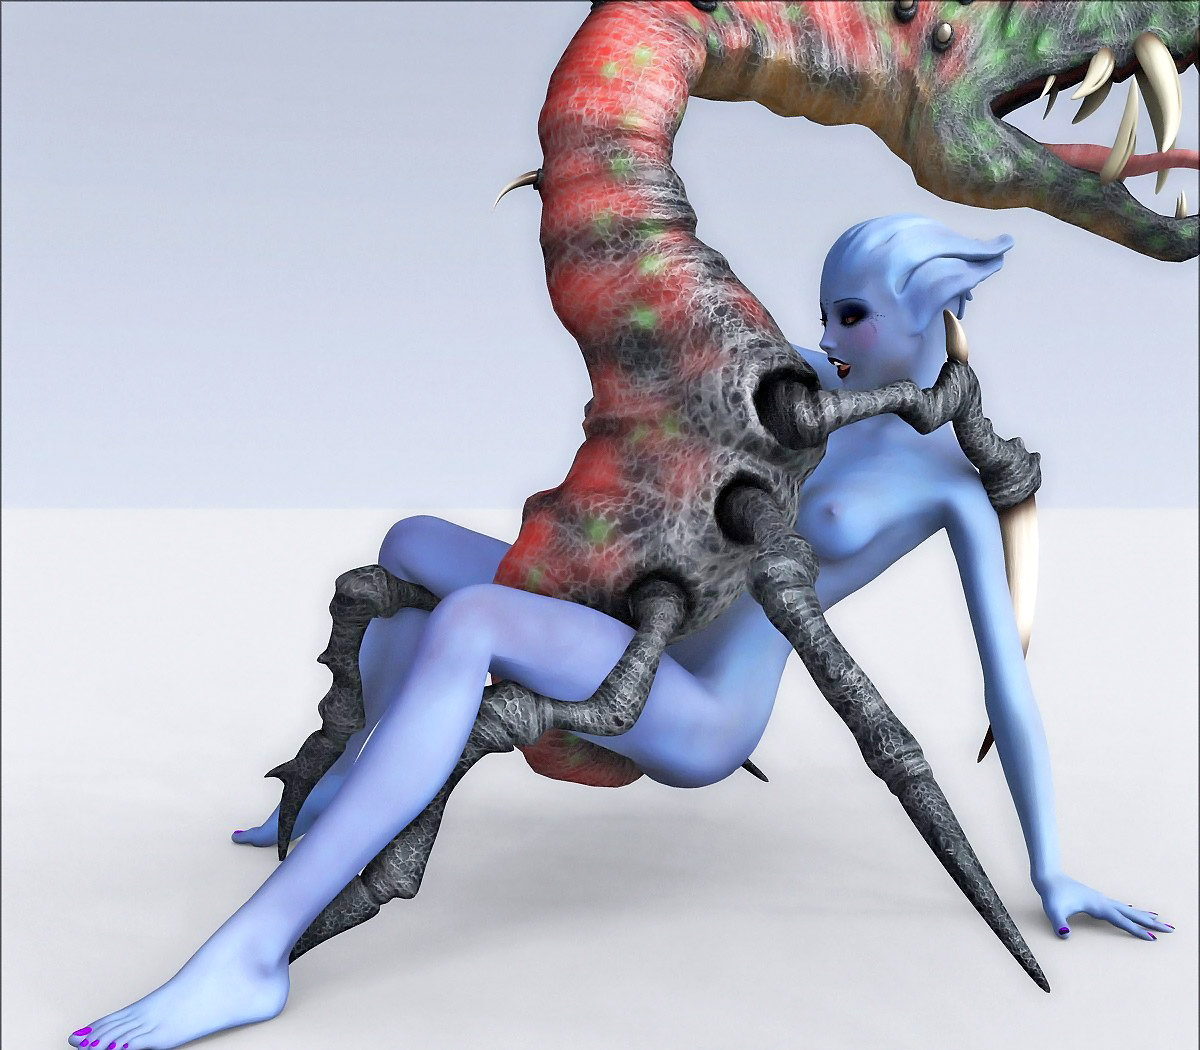 3d Bug Porn Girls - chick takes on big insect during 3d cartoon monster sex | 3dwerewolfporn.com